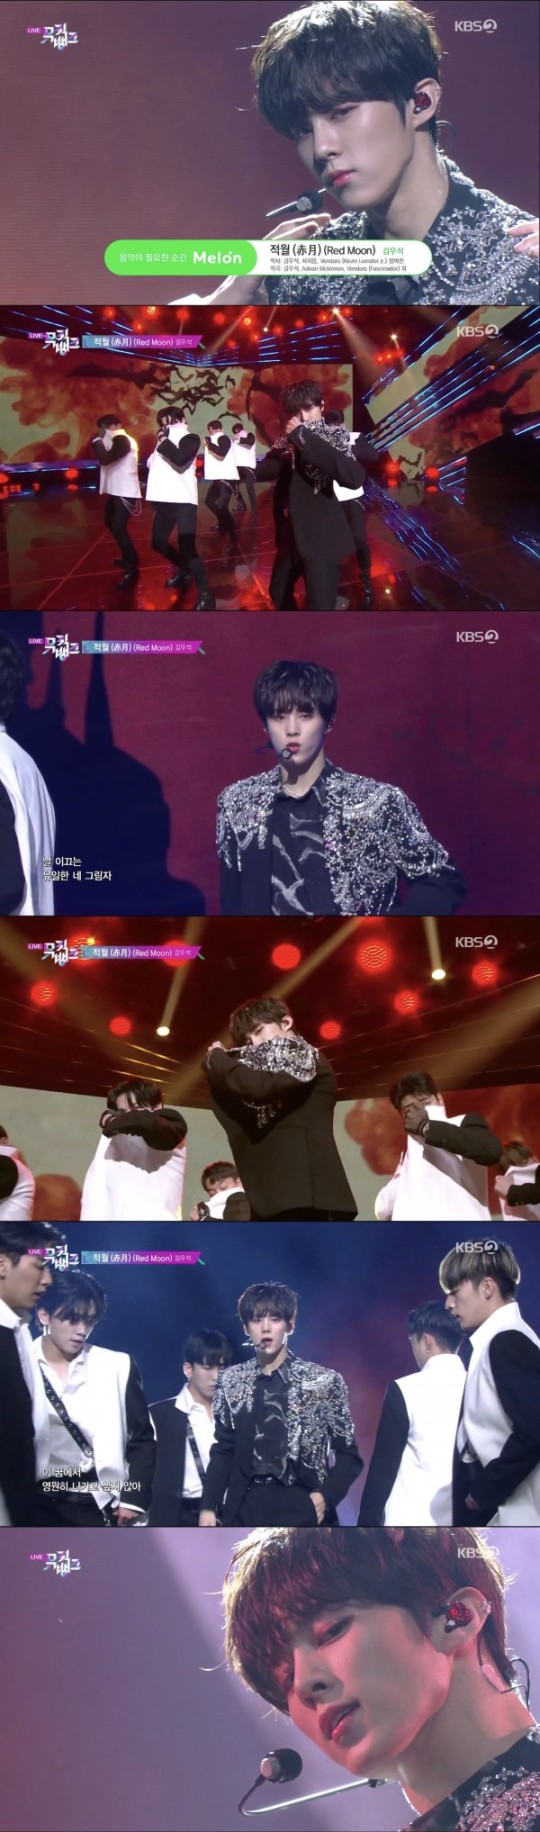 kim-woo-seok-shines-in-front-of-last-music-bank-stage-for-debut-solo-promotion-1